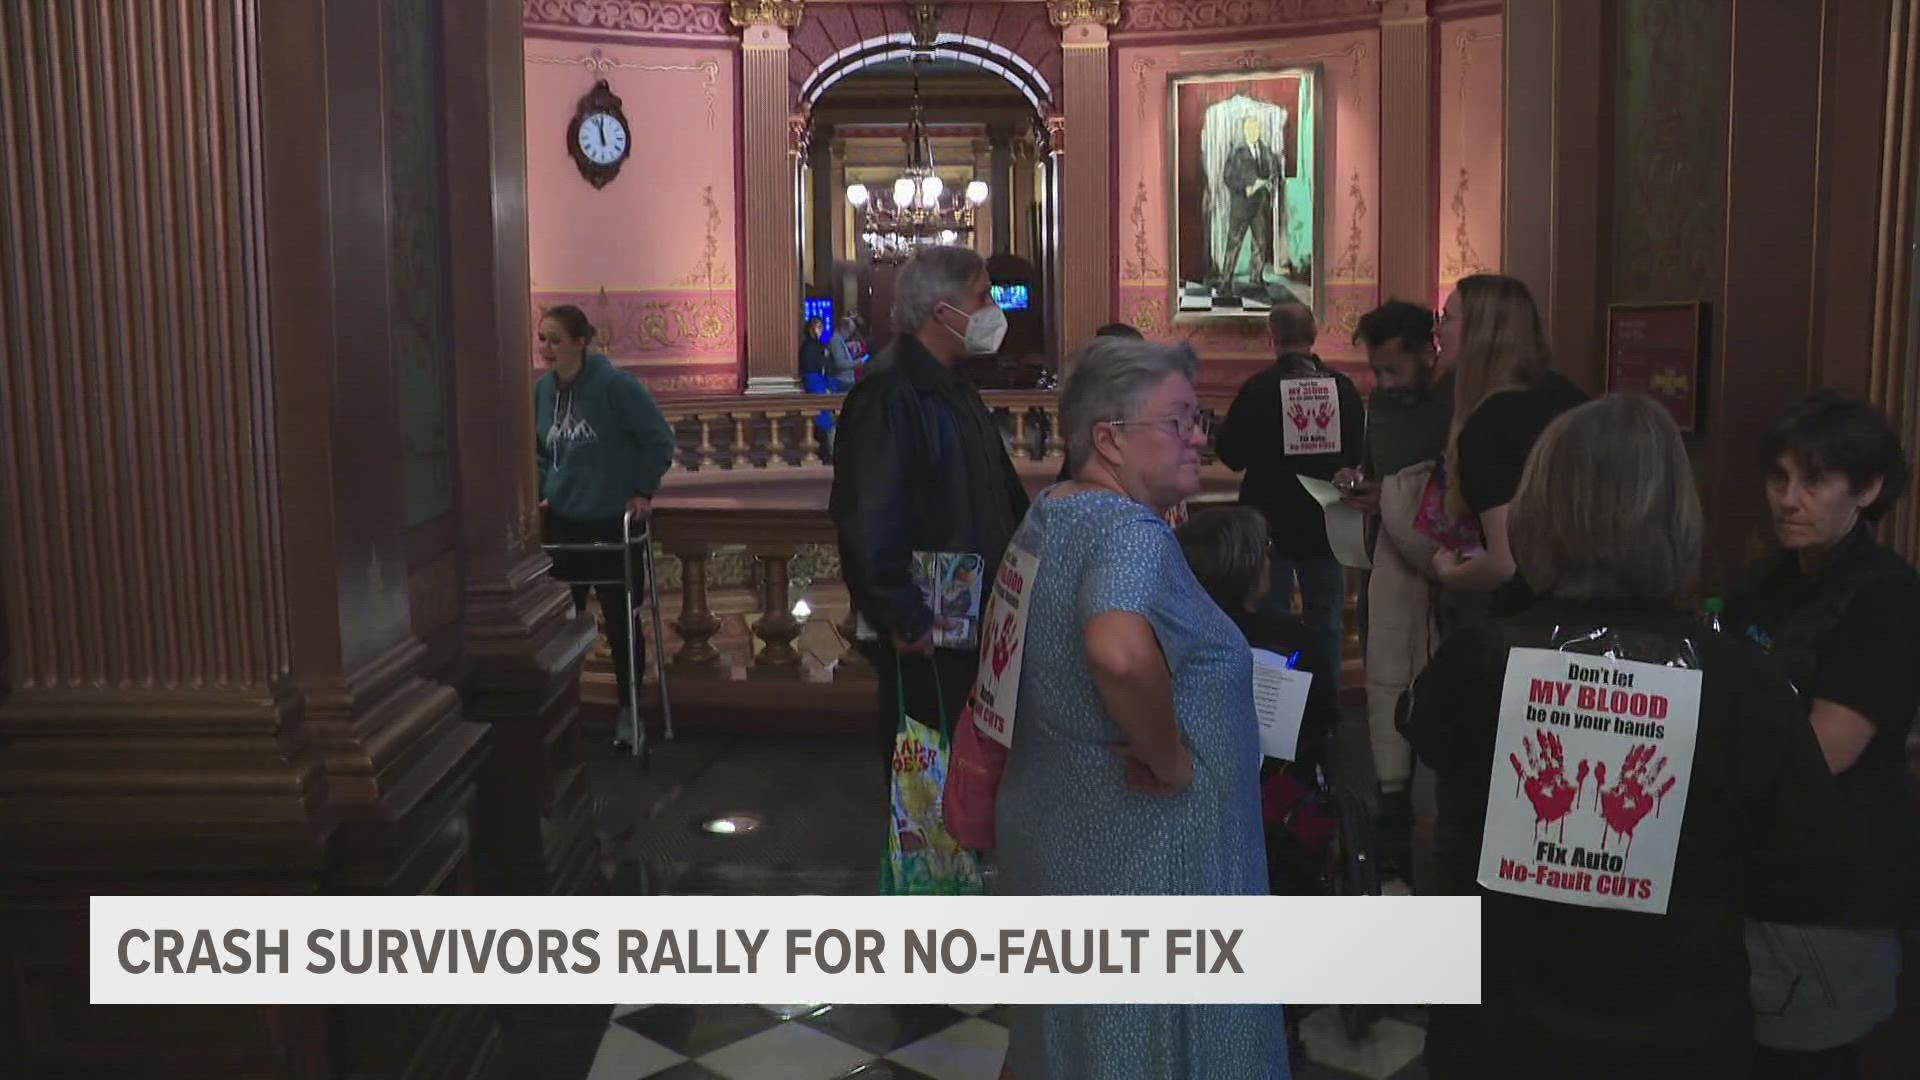 For months, survivors have been dealing with decreased care due to the auto no fault law being changed.